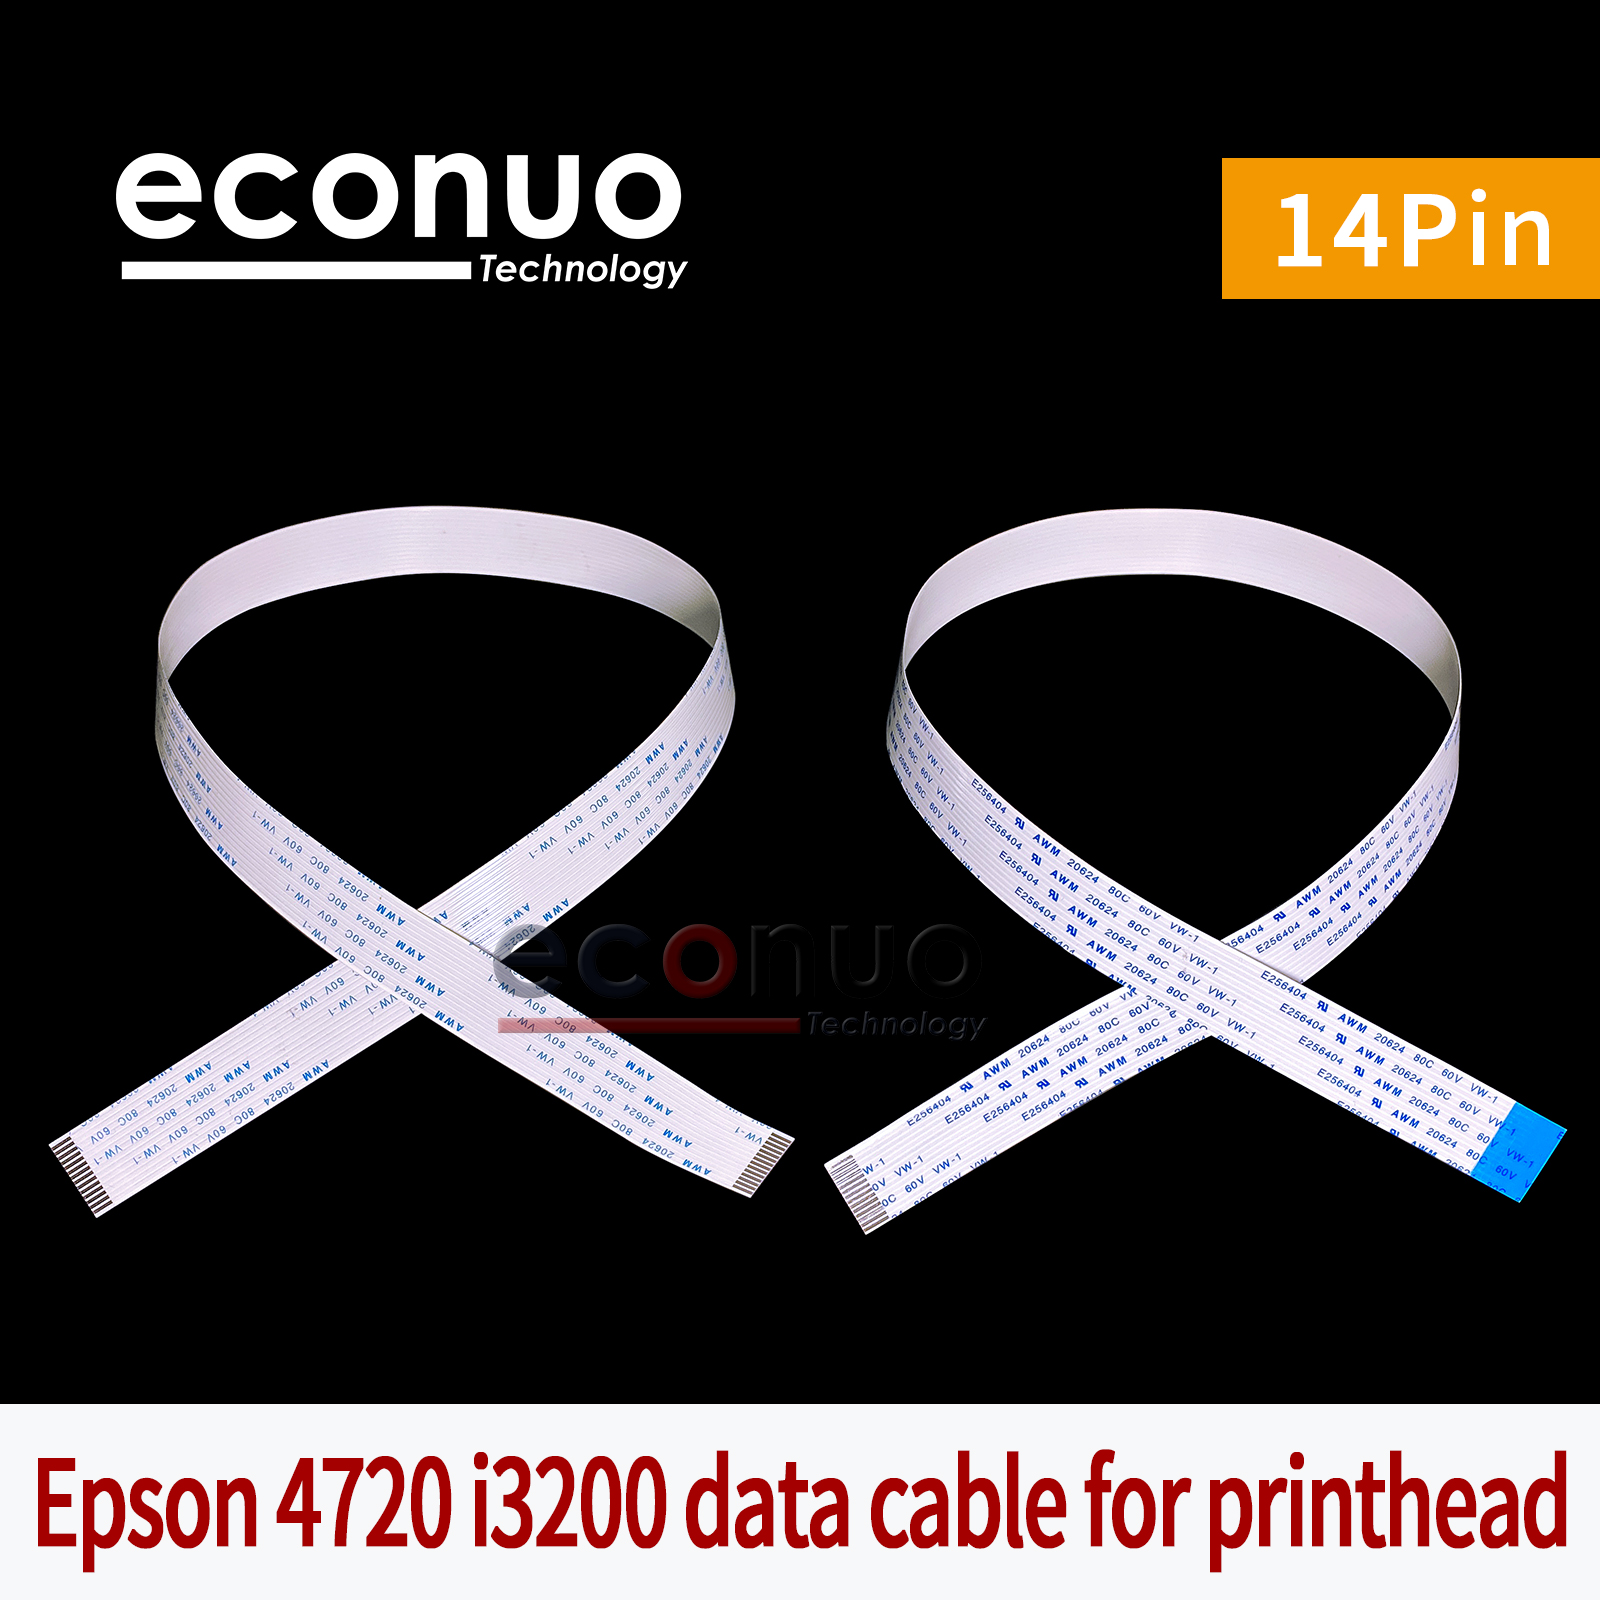 Epson 4720 i3200 data cable for printhead(14 pin)